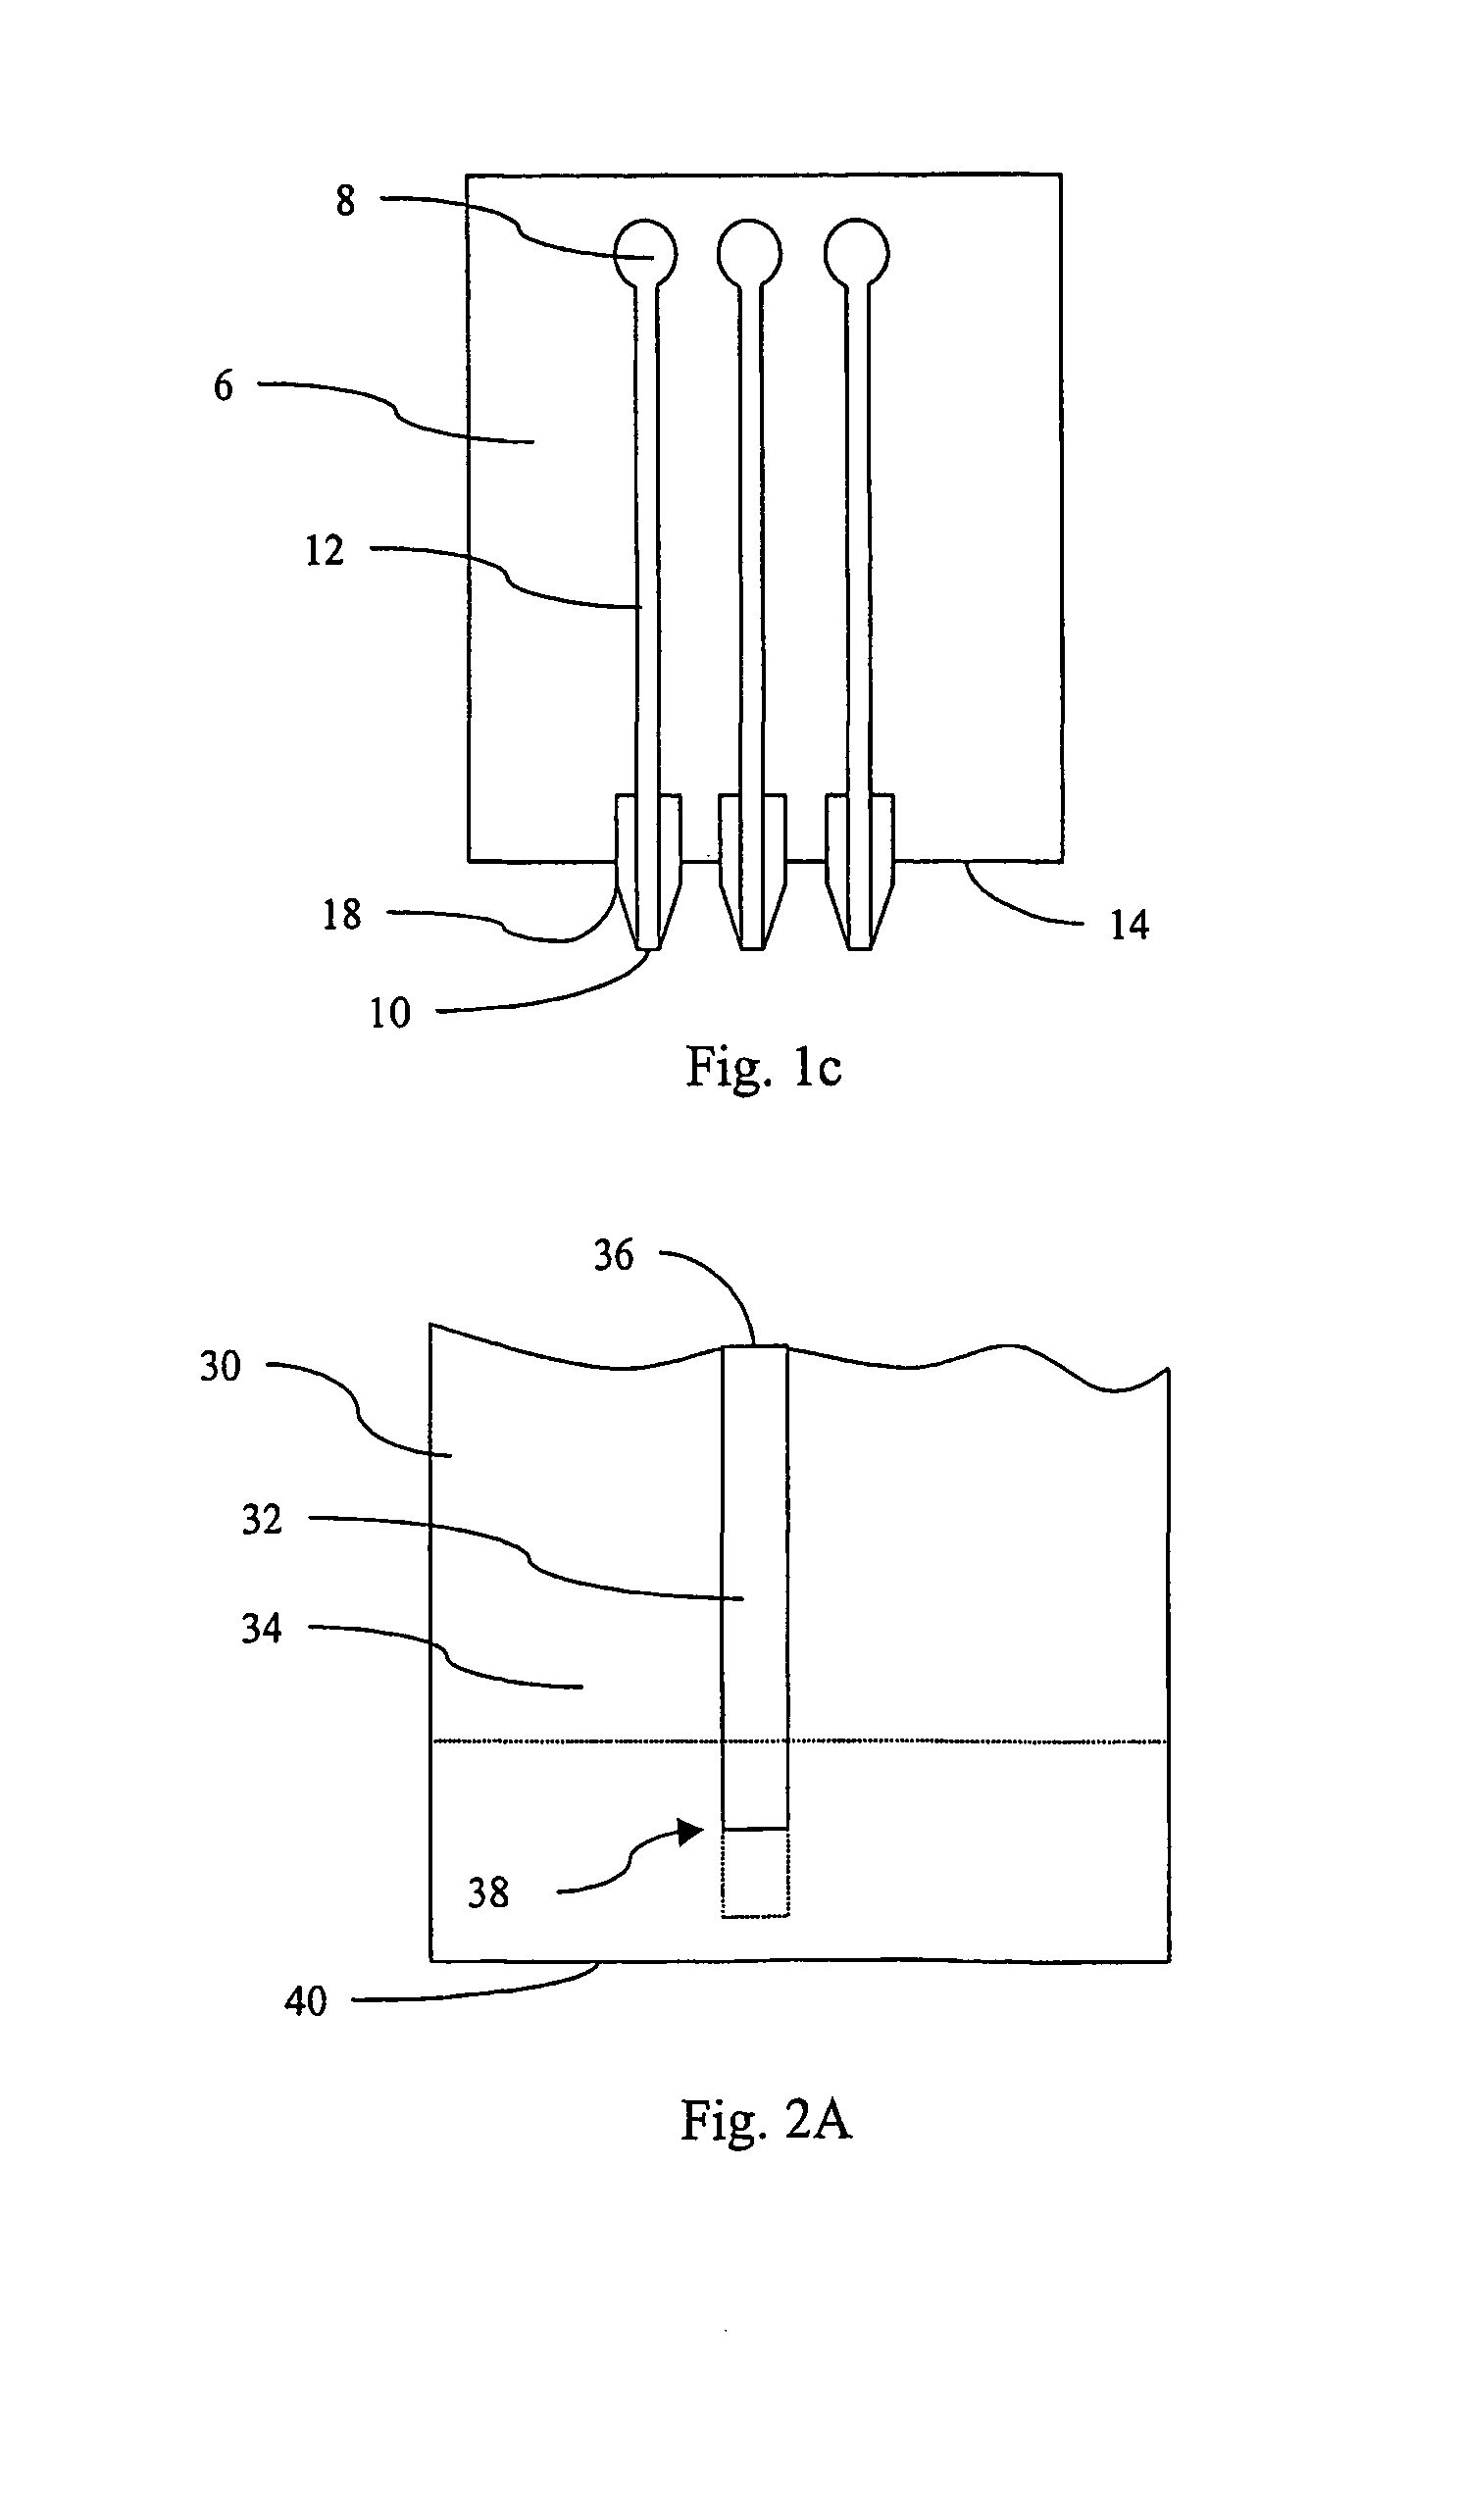 Method of manufacturing a microscale nozzle